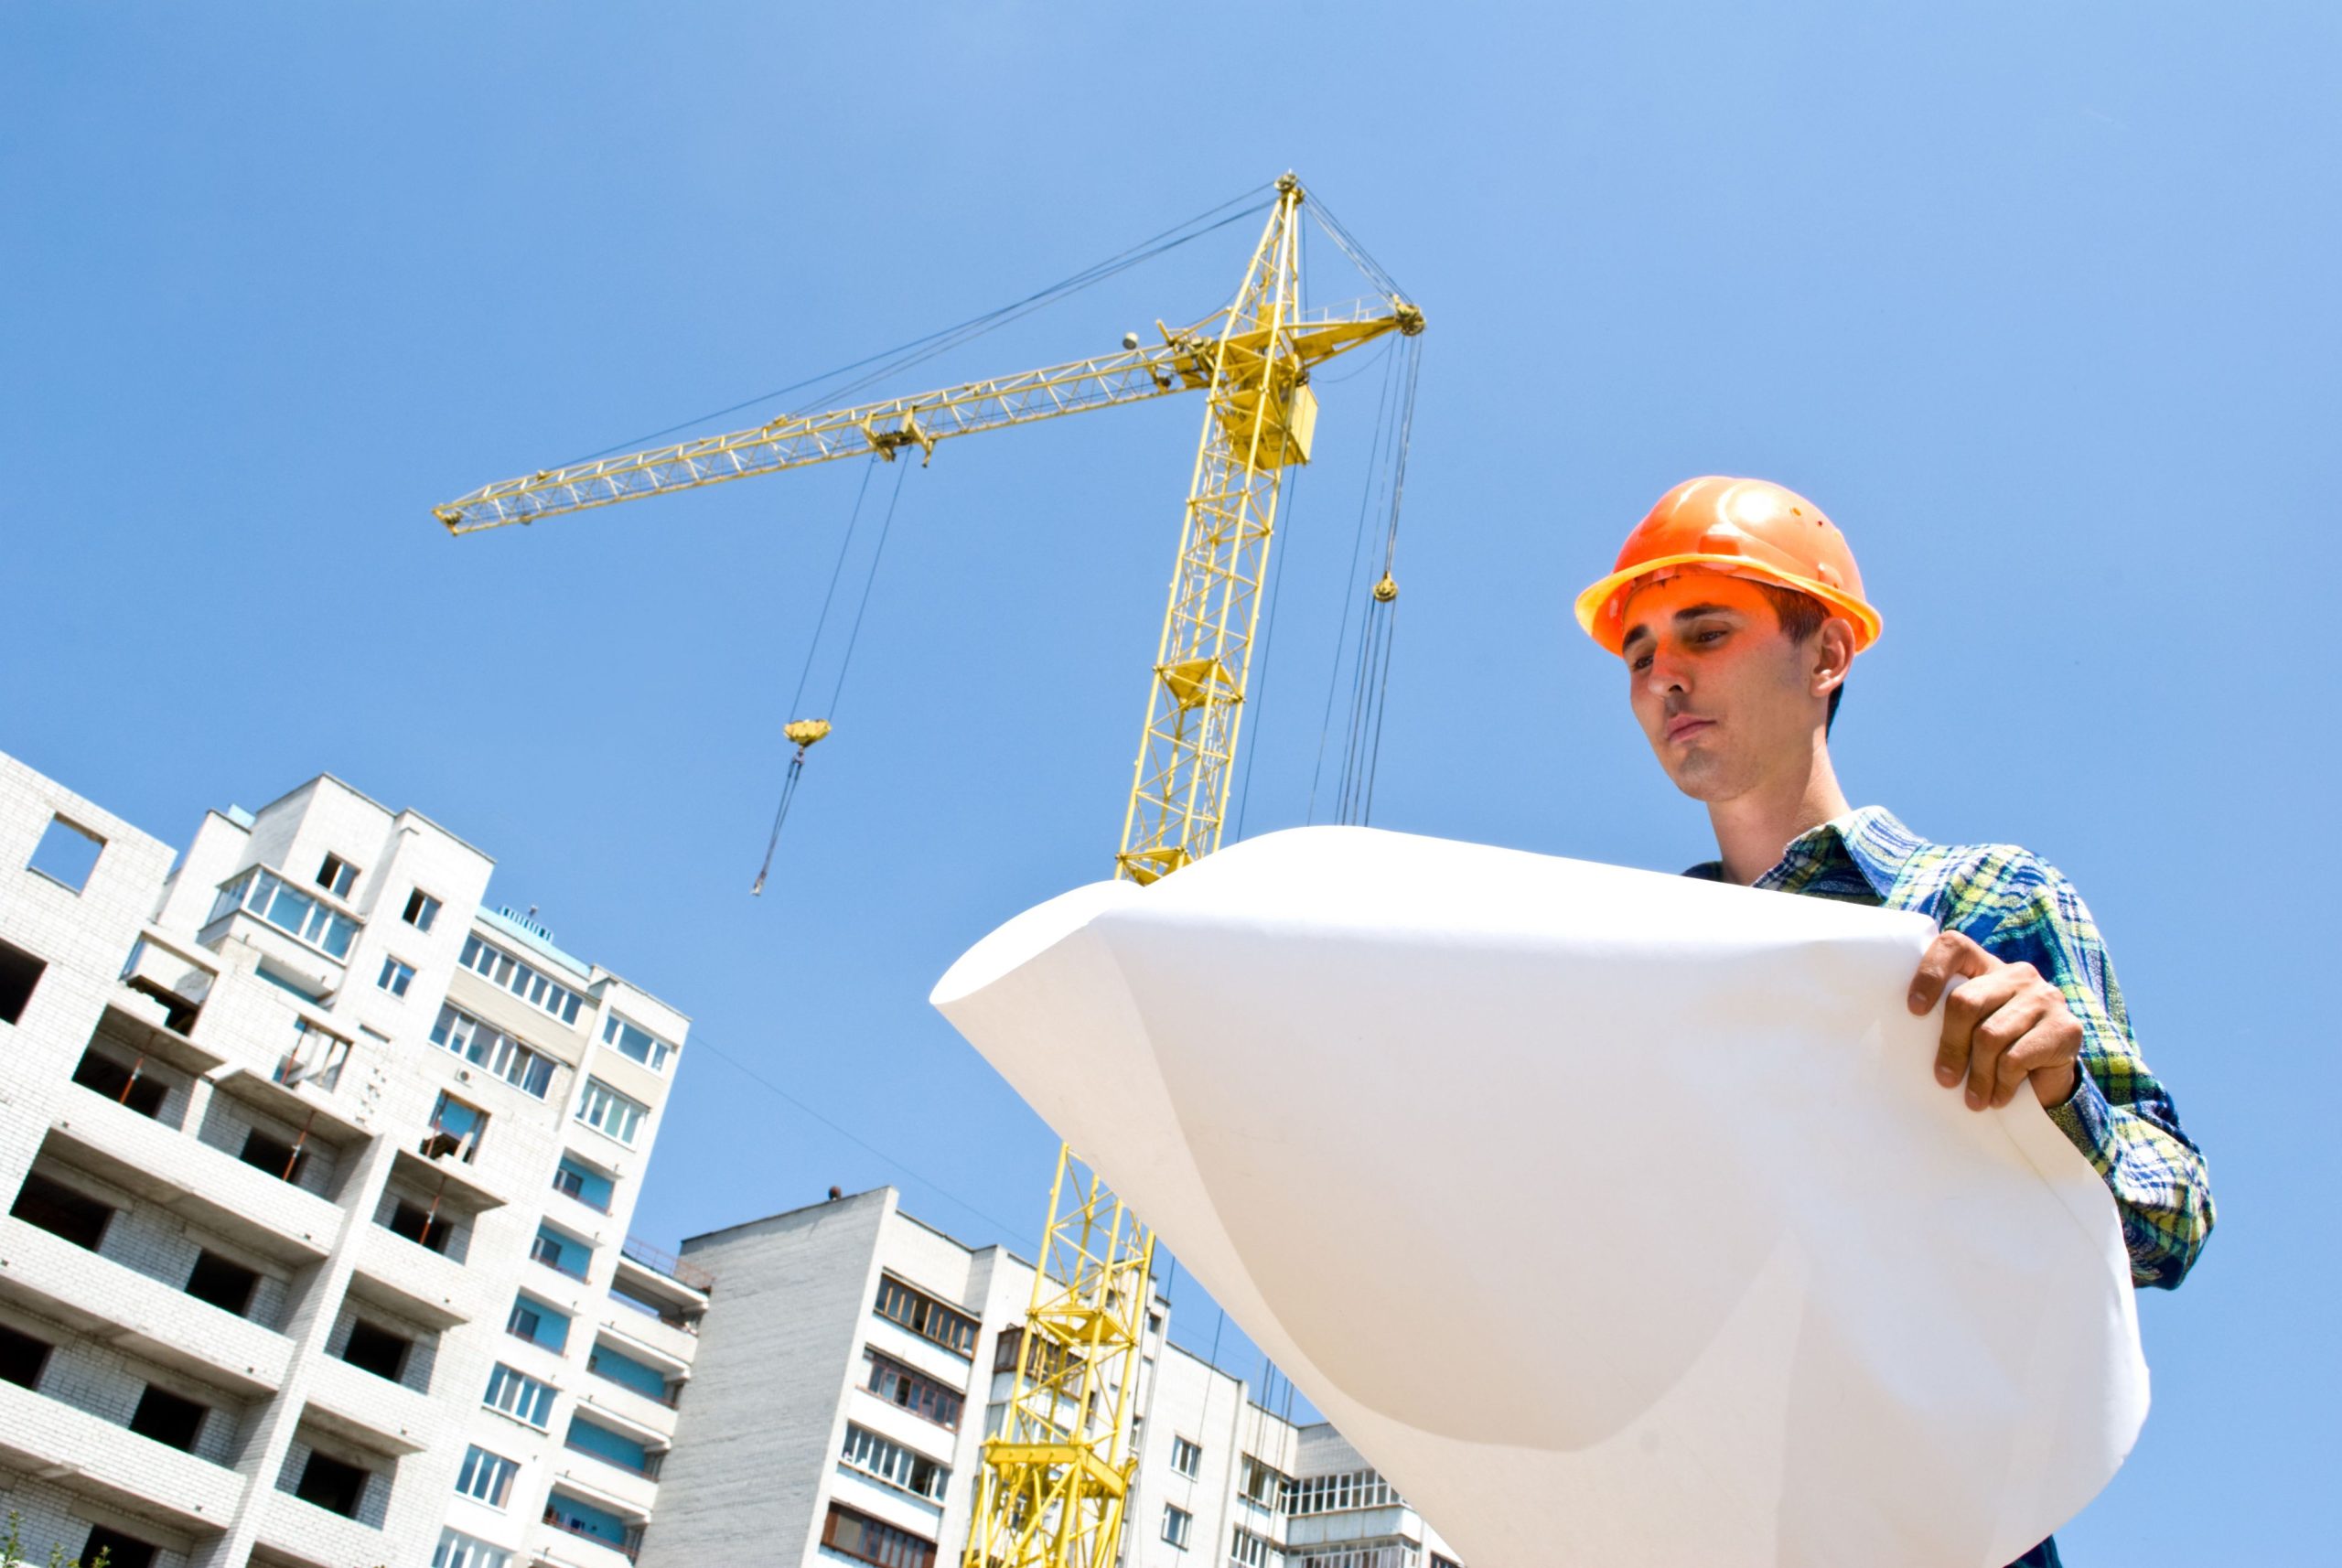 It’s Best to Hire Experienced Commercial Construction Companies in The Twin Cities